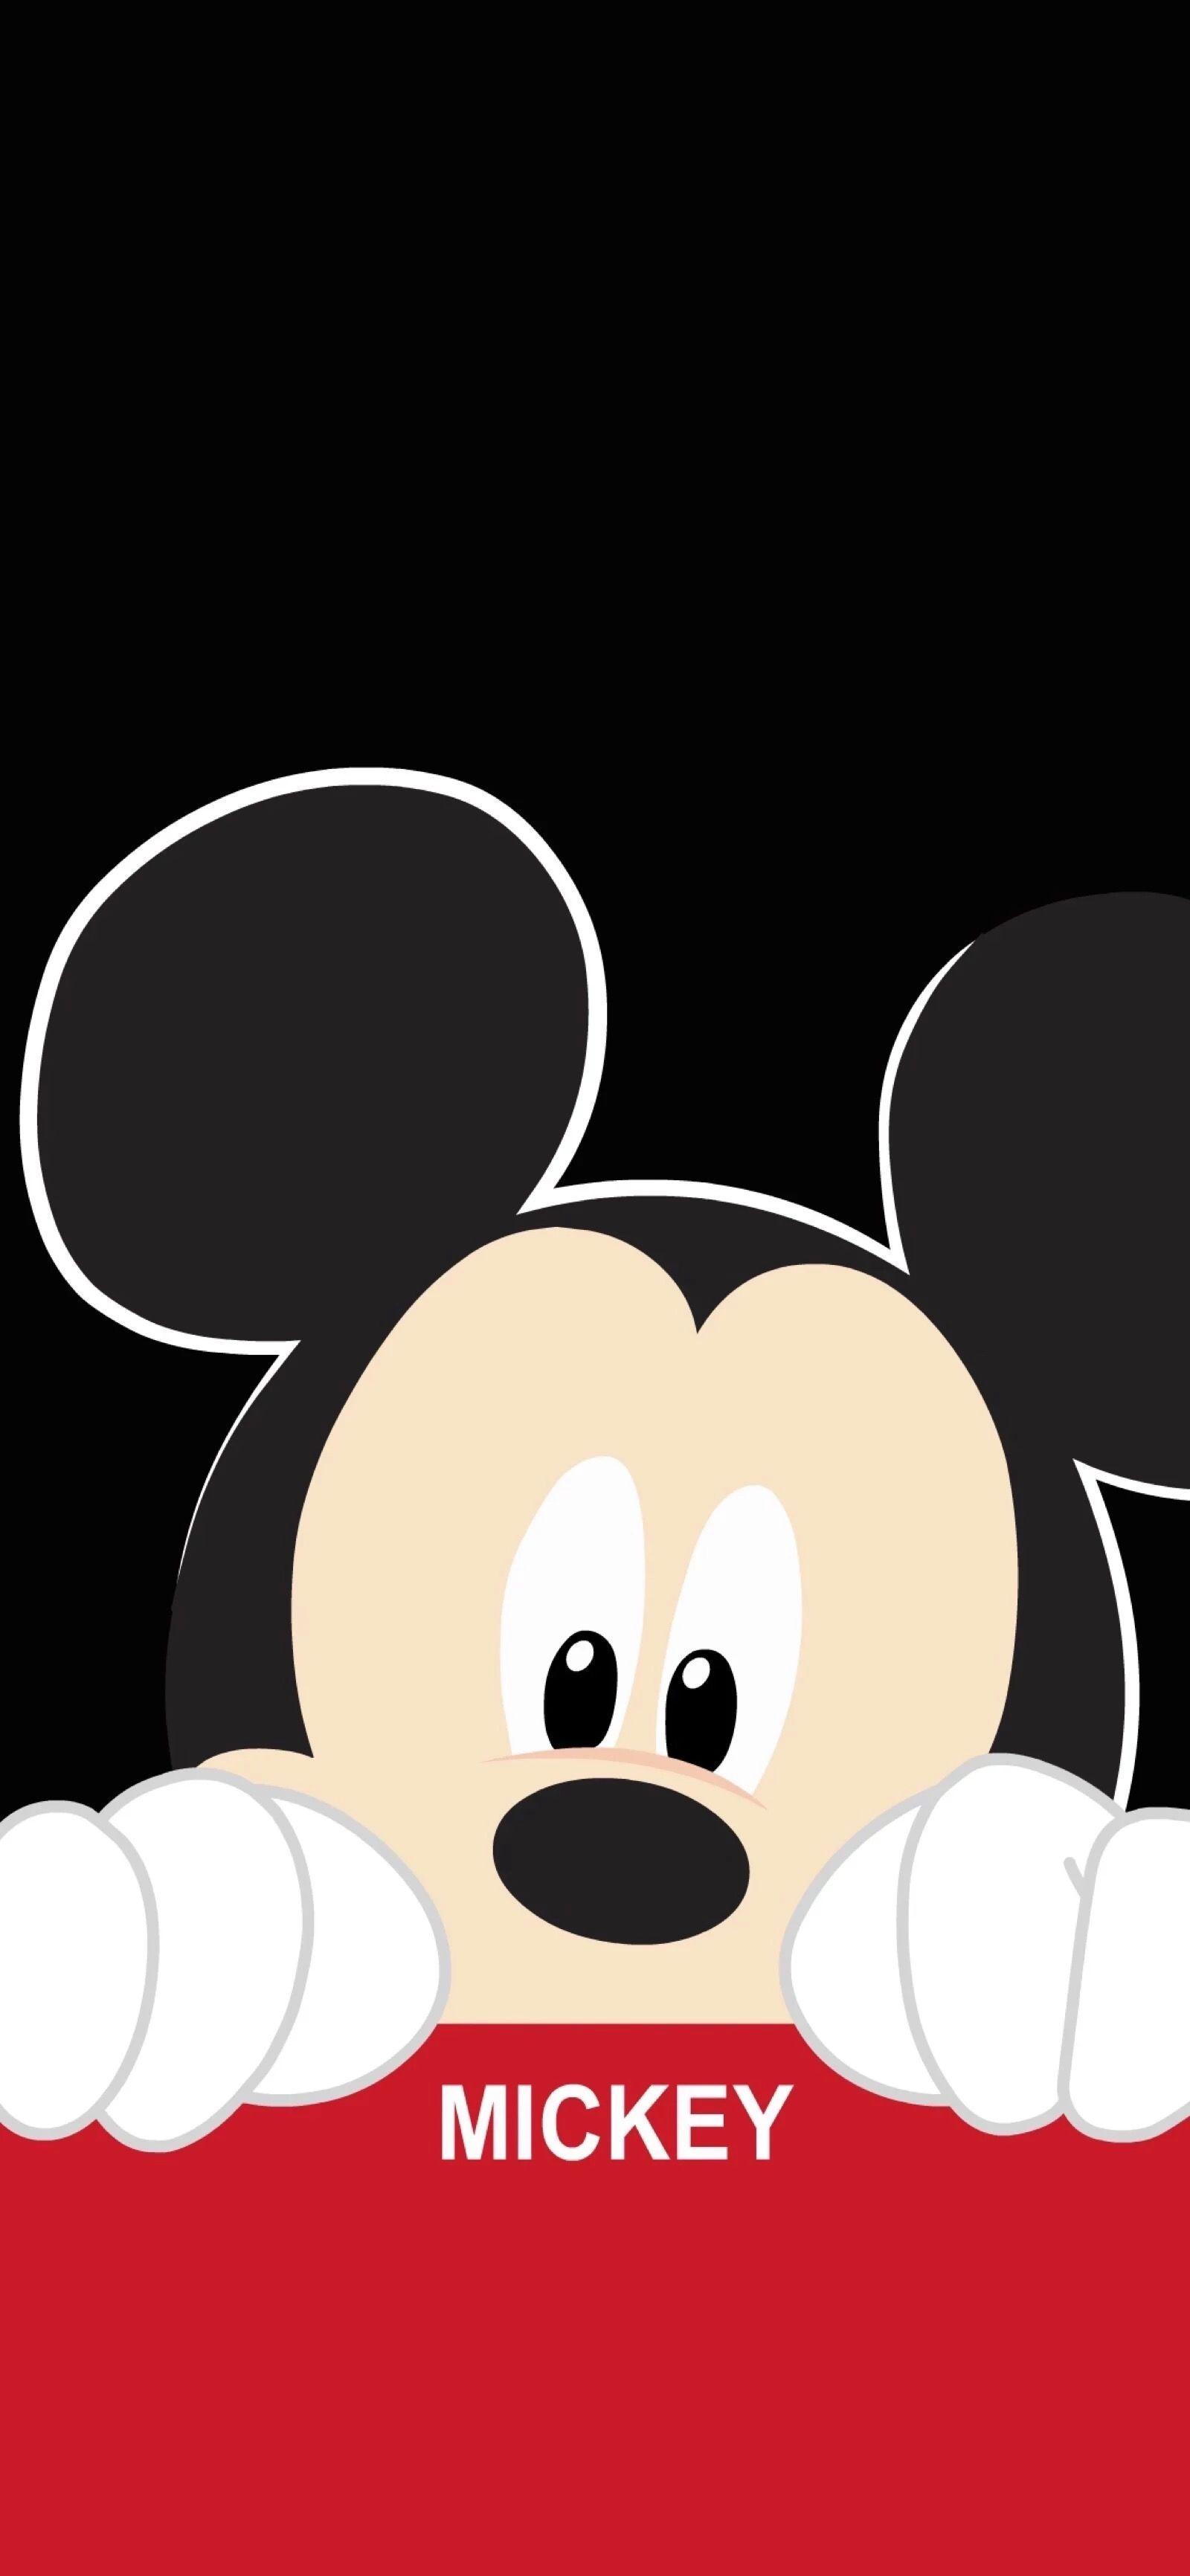 Mickey Mouse Iphone 5 Wallpapers Top Free Mickey Mouse Iphone 5 Backgrounds Wallpaperaccess